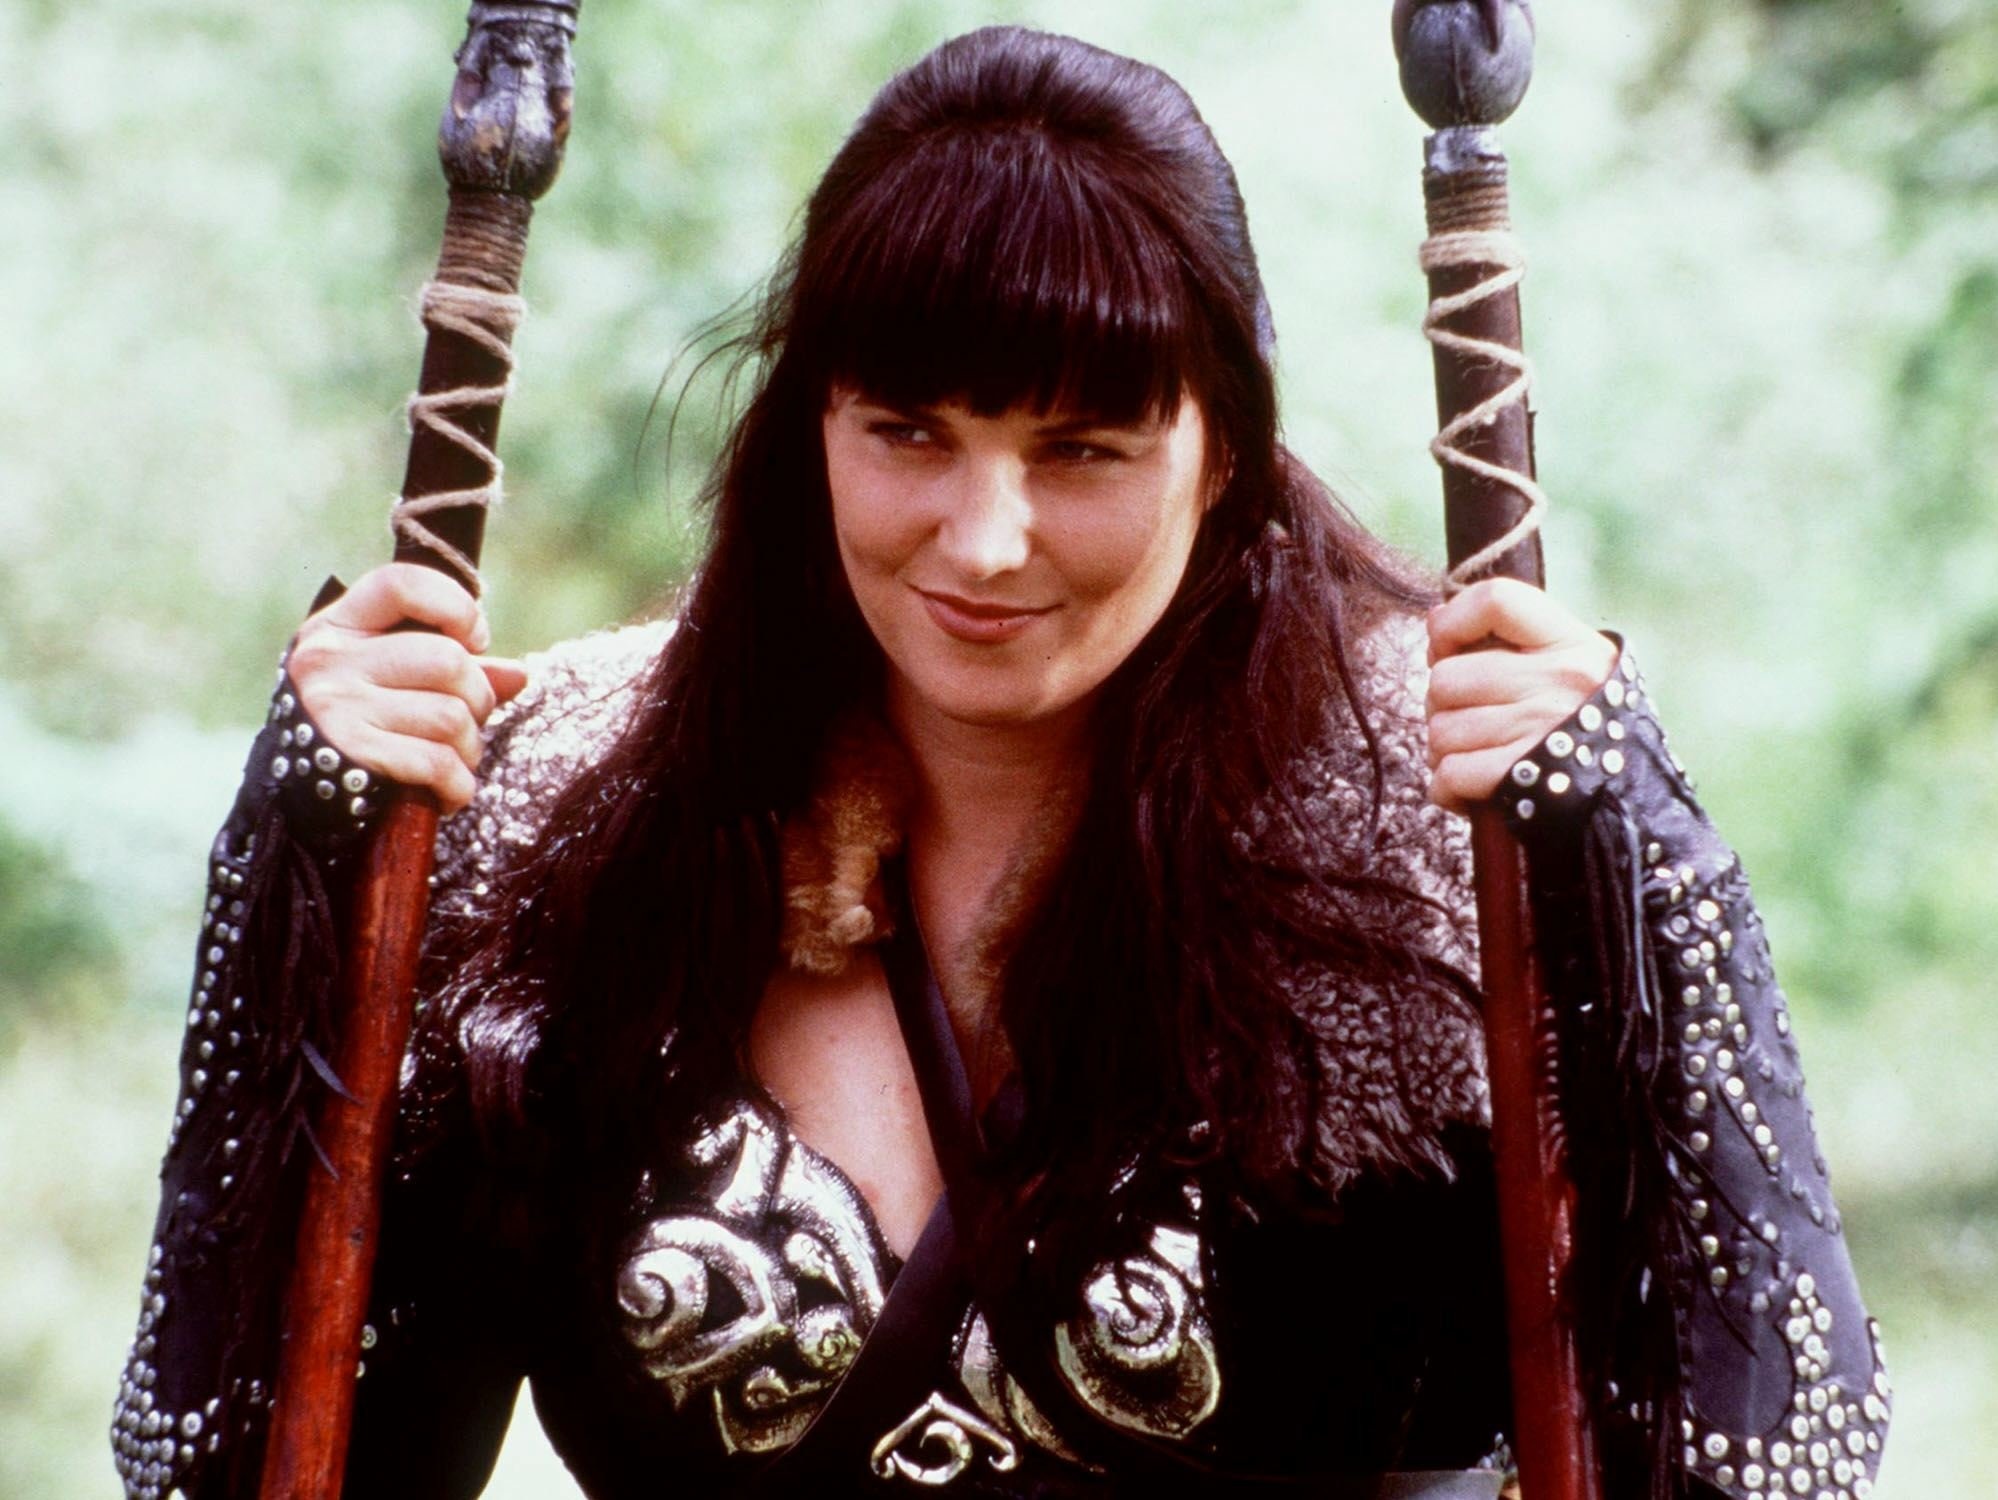 Xena: Warrior Princess (TV Series): Lucy Lawless as one of the most famous female warlords. 2000x1500 HD Wallpaper.